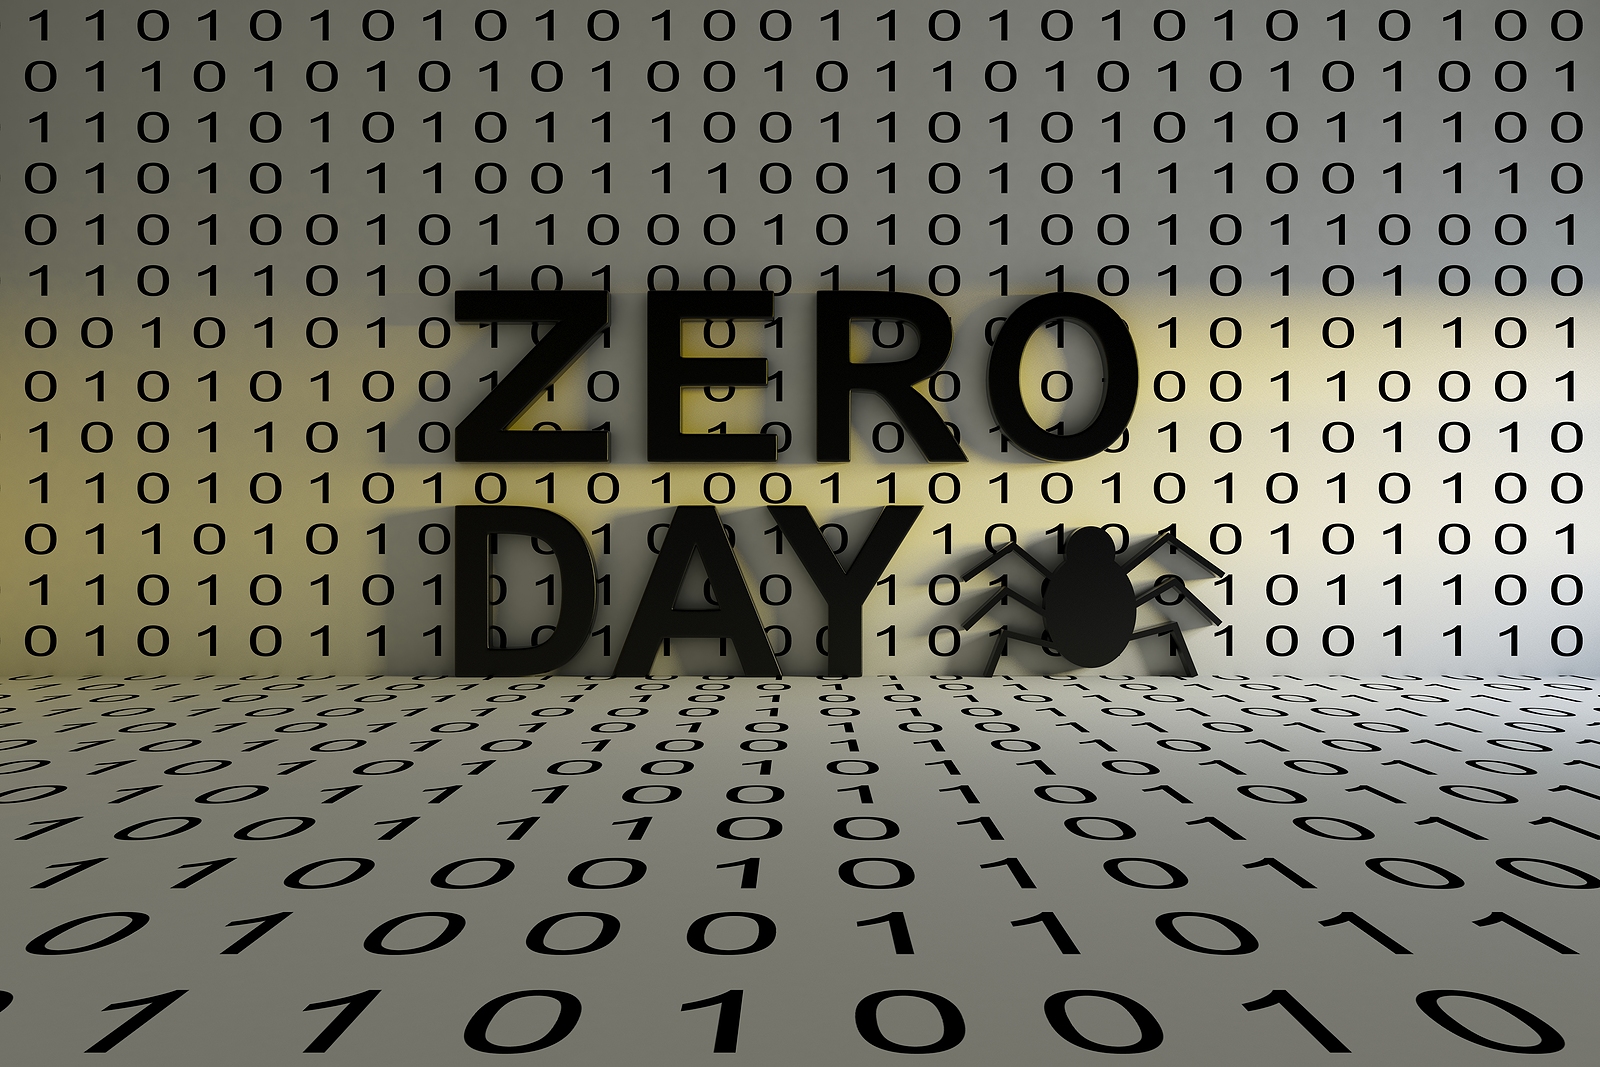 zero-day-in-moveit-file-transfer-software-exploited-to-steal-data-from-organizations